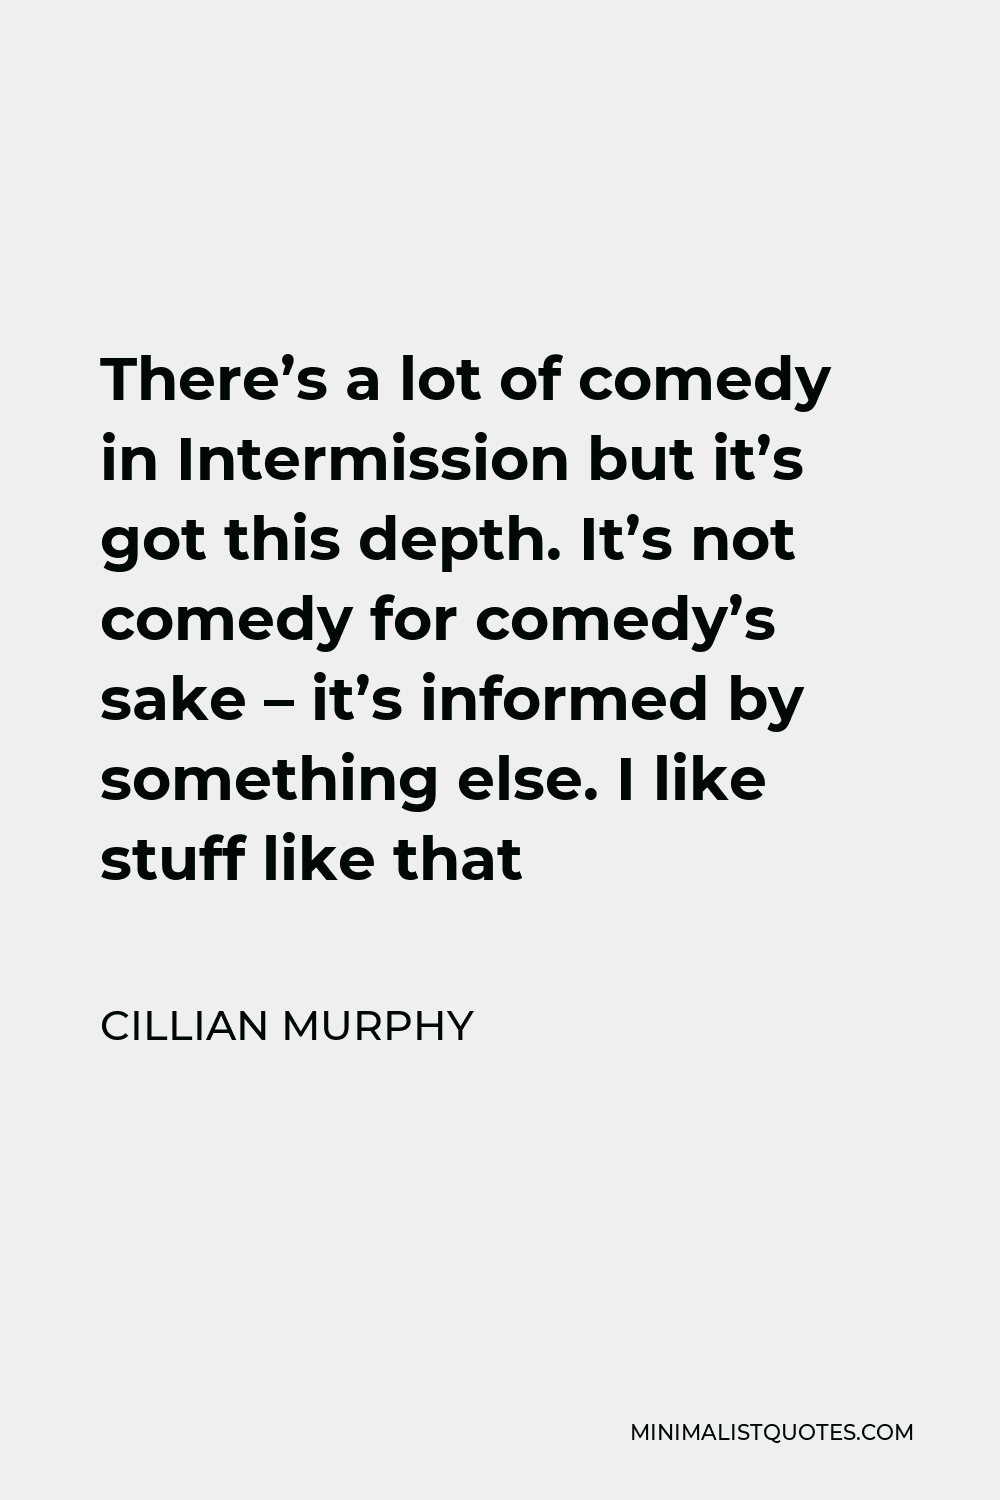 Cillian Murphy Quote - There’s a lot of comedy in Intermission but it’s got this depth. It’s not comedy for comedy’s sake – it’s informed by something else. I like stuff like that